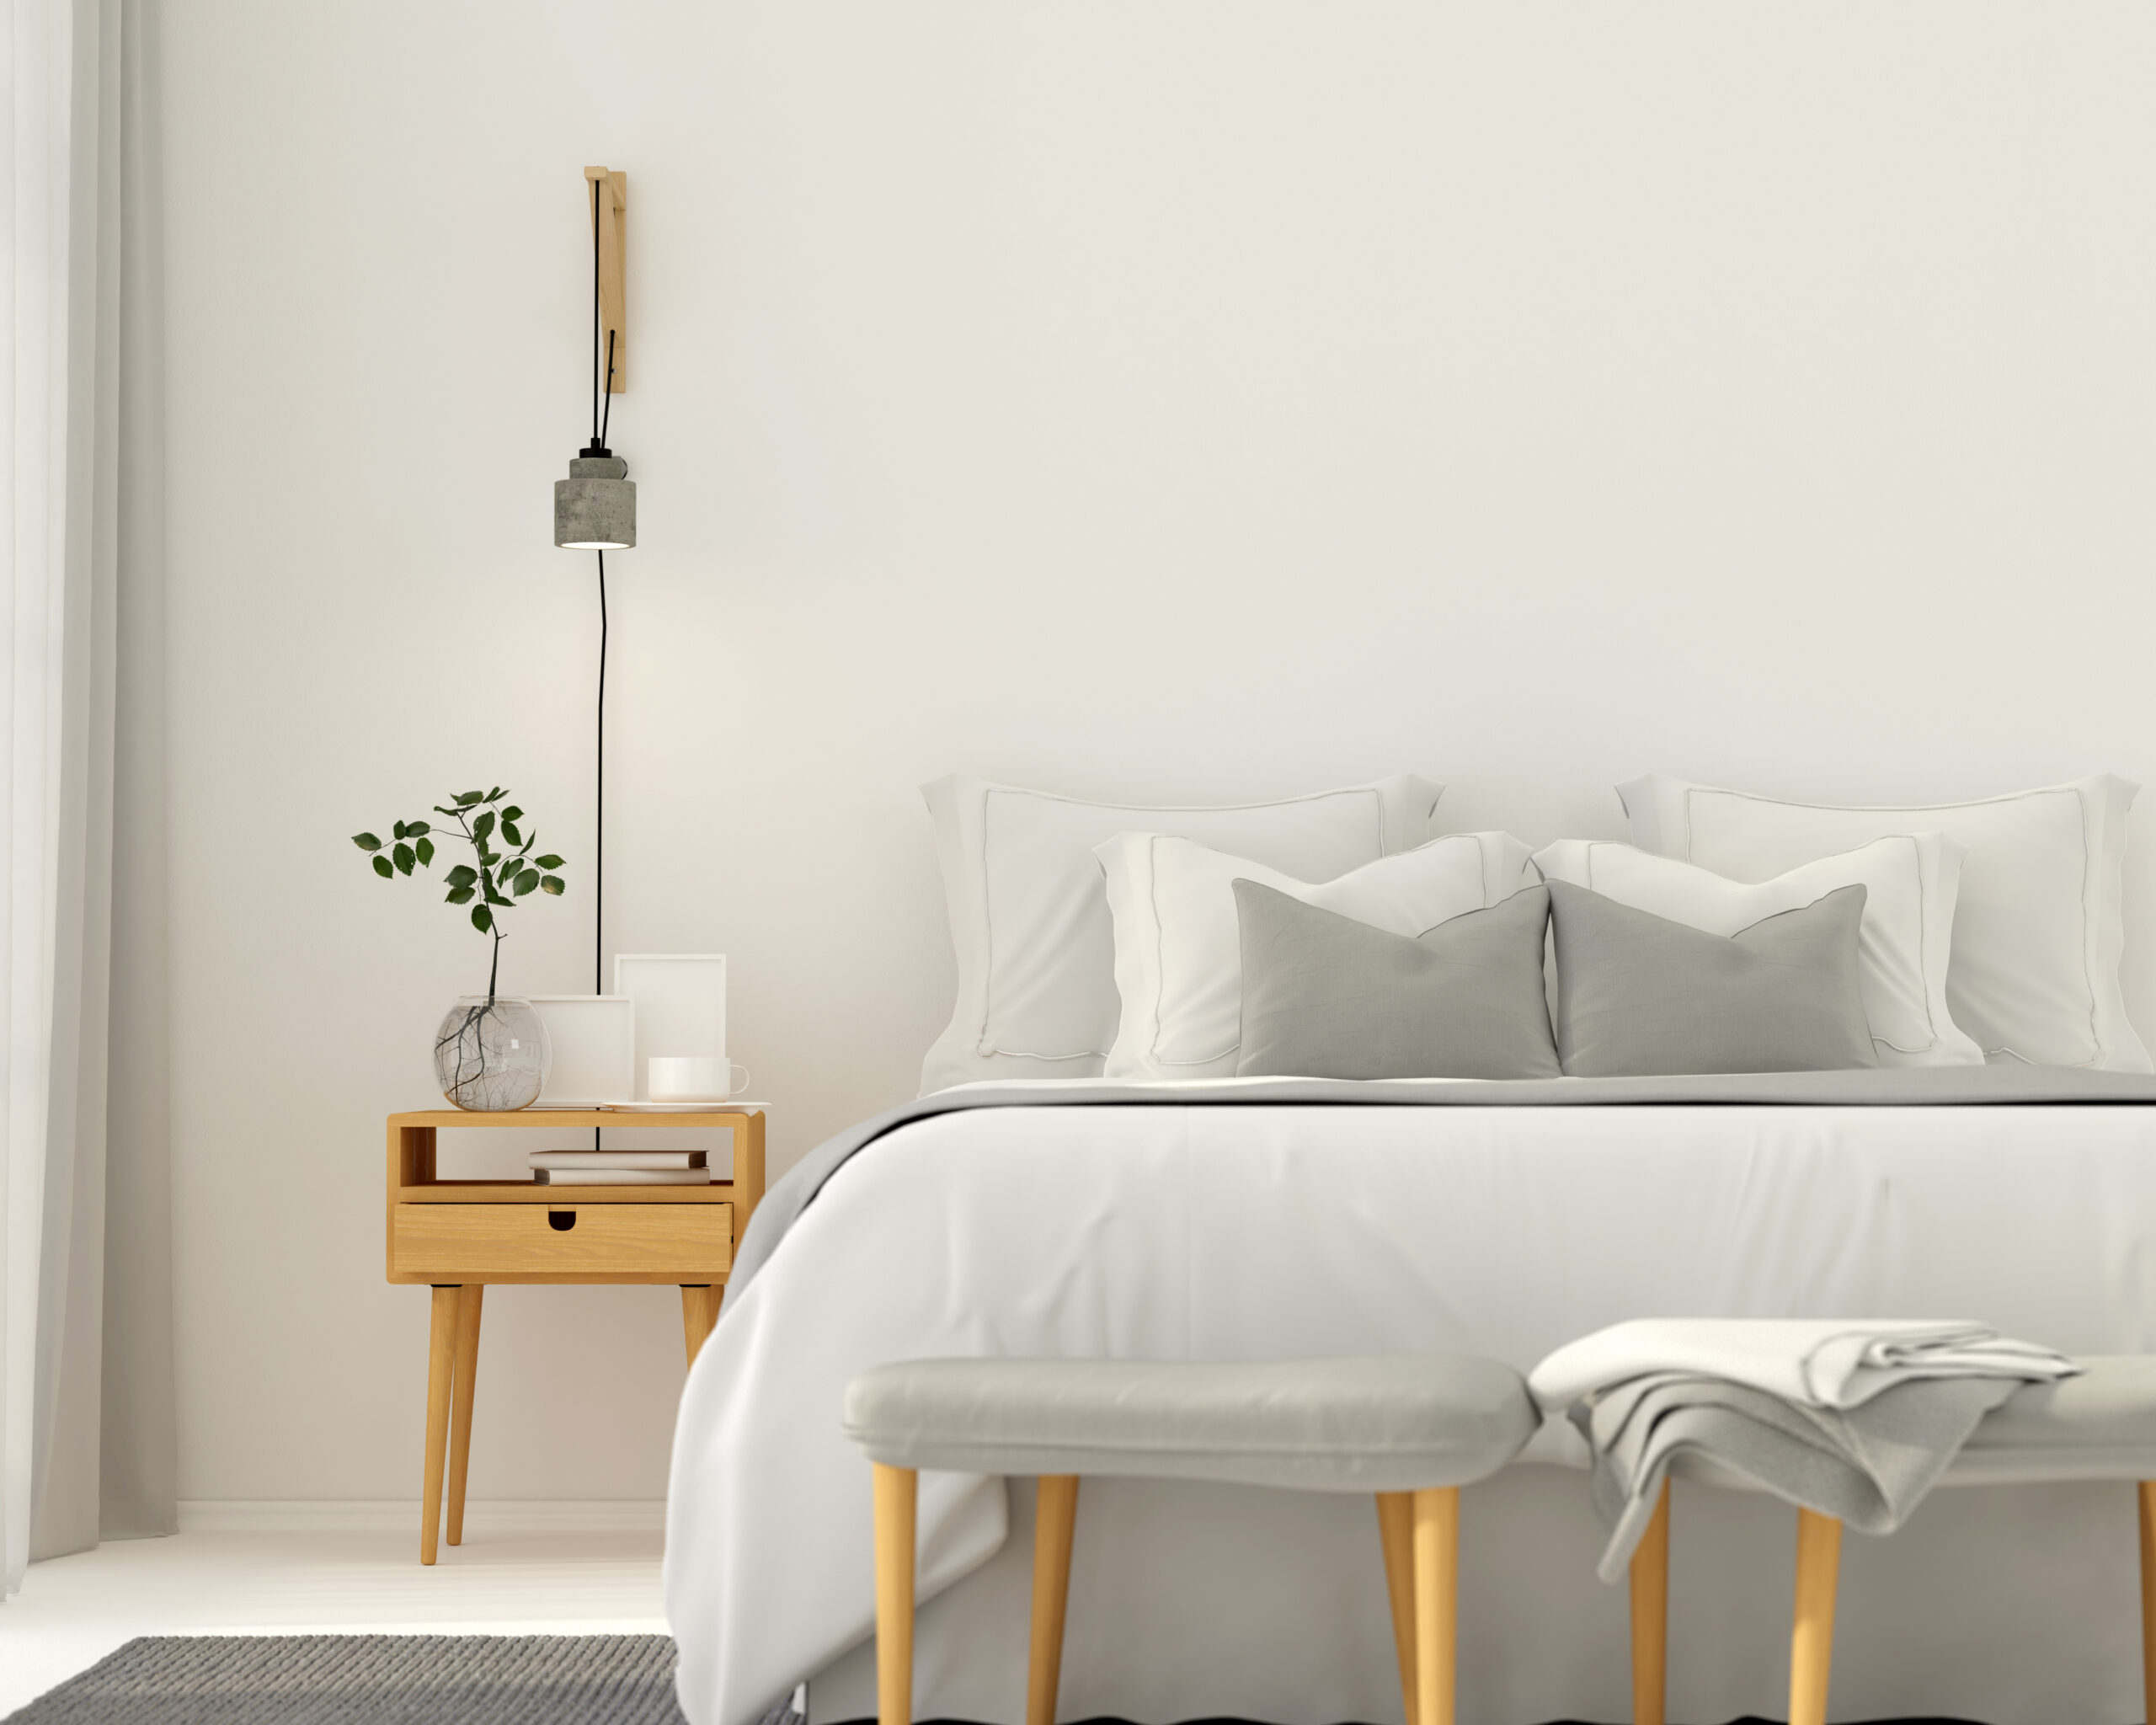 3D illustration. Modern bedroom interior in a light gray color with wooden furniture